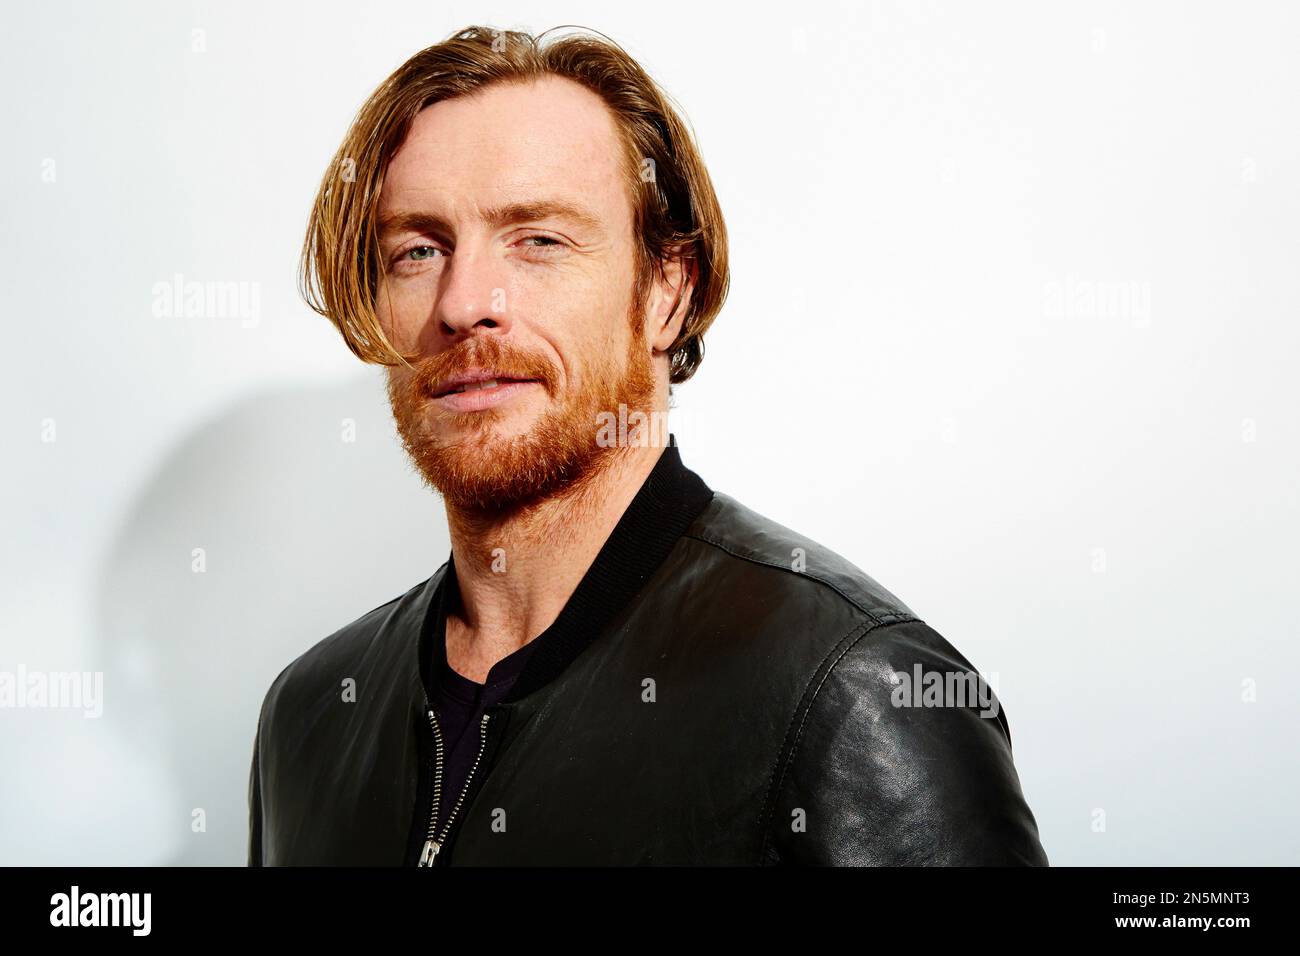 8 Questions WithToby Stephens